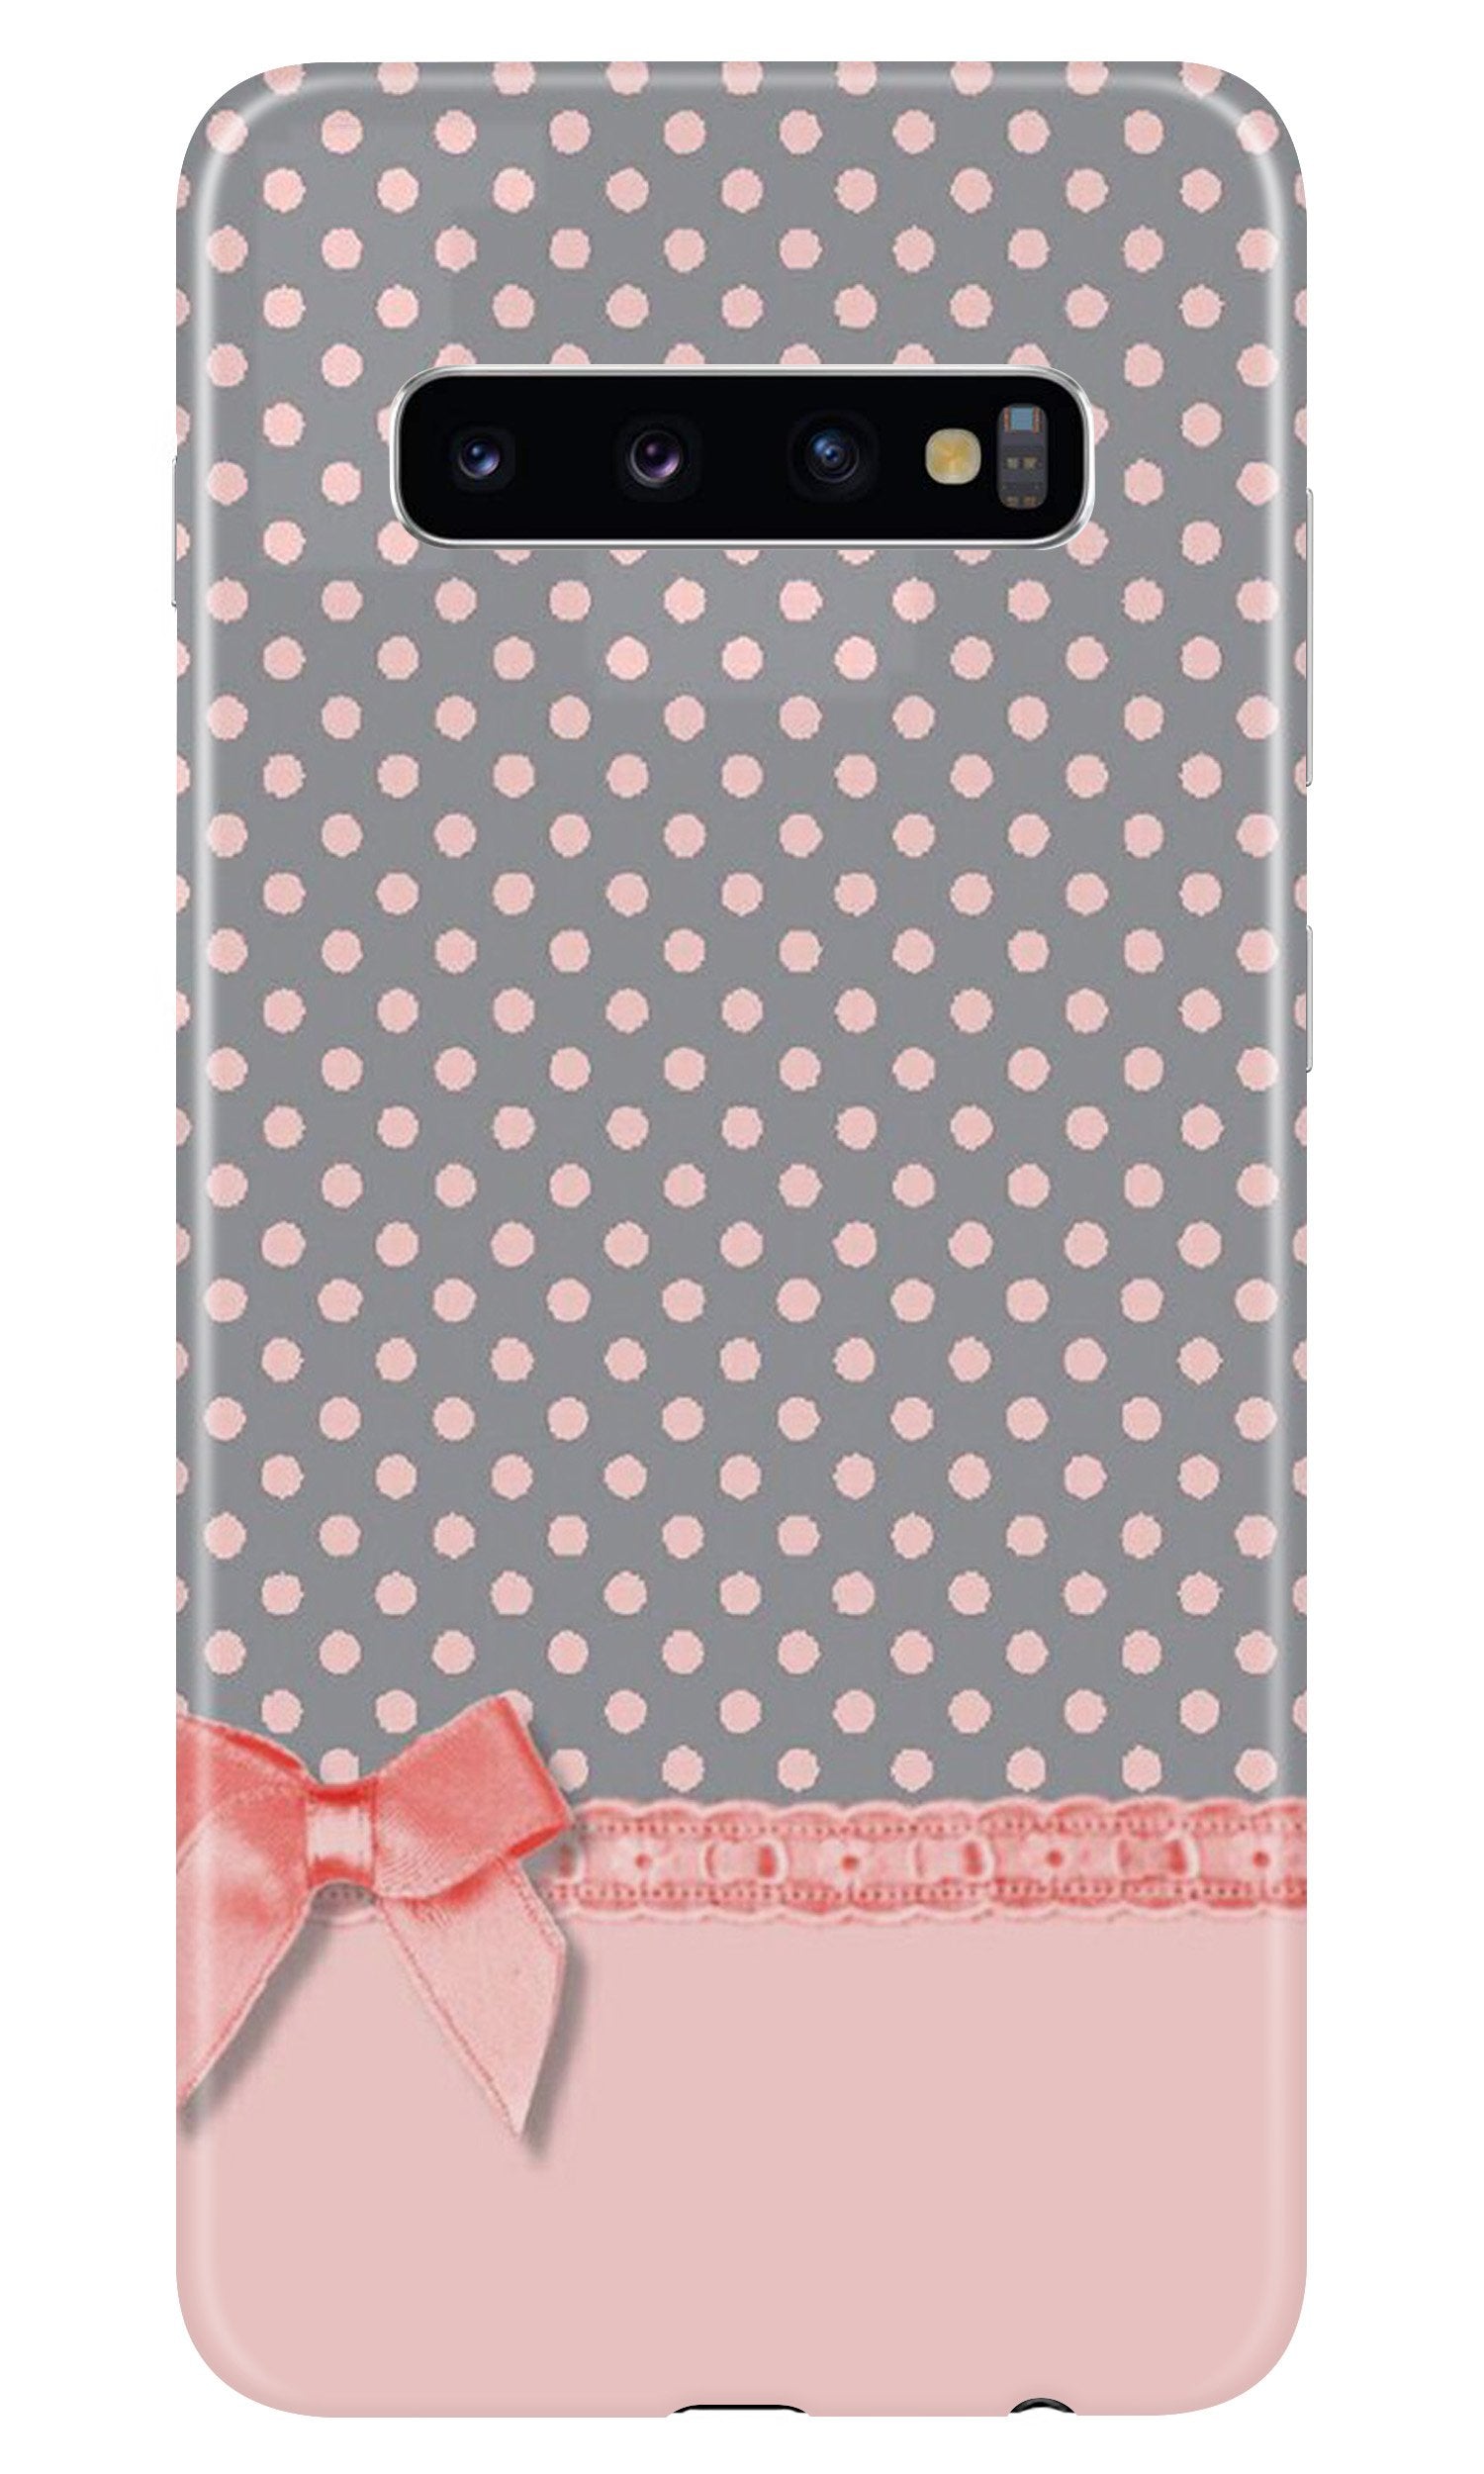 Gift Wrap2 Case for Samsung Galaxy S10 Plus